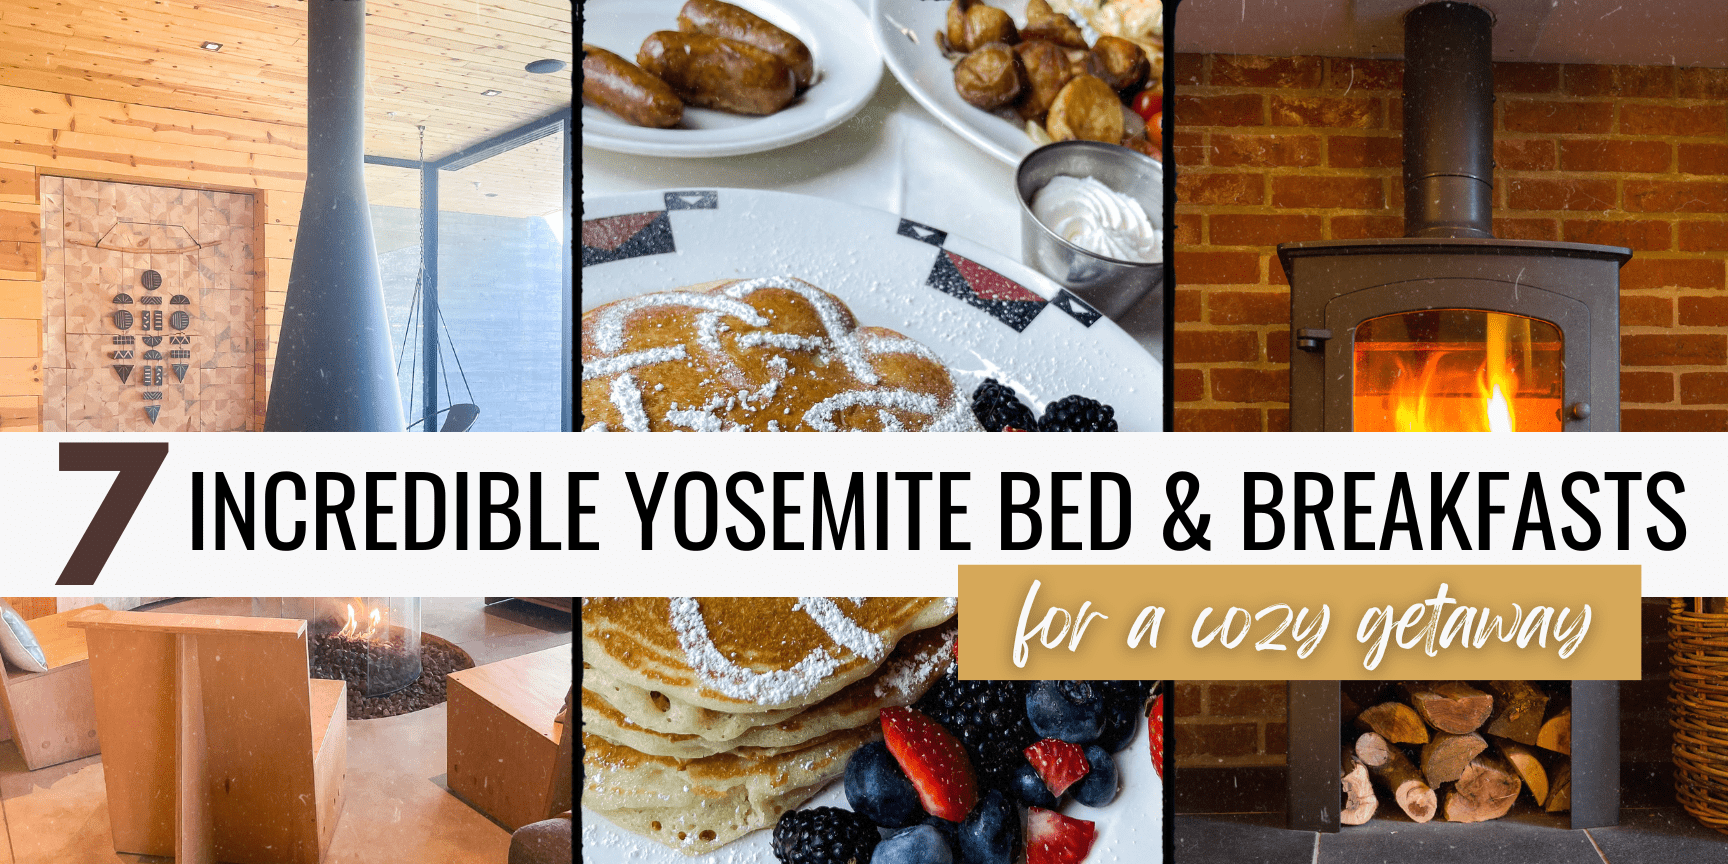 Incredible Yosemite Bed & Breakfasts for a cozy getaway with images of fireplace and pancakes with fruit